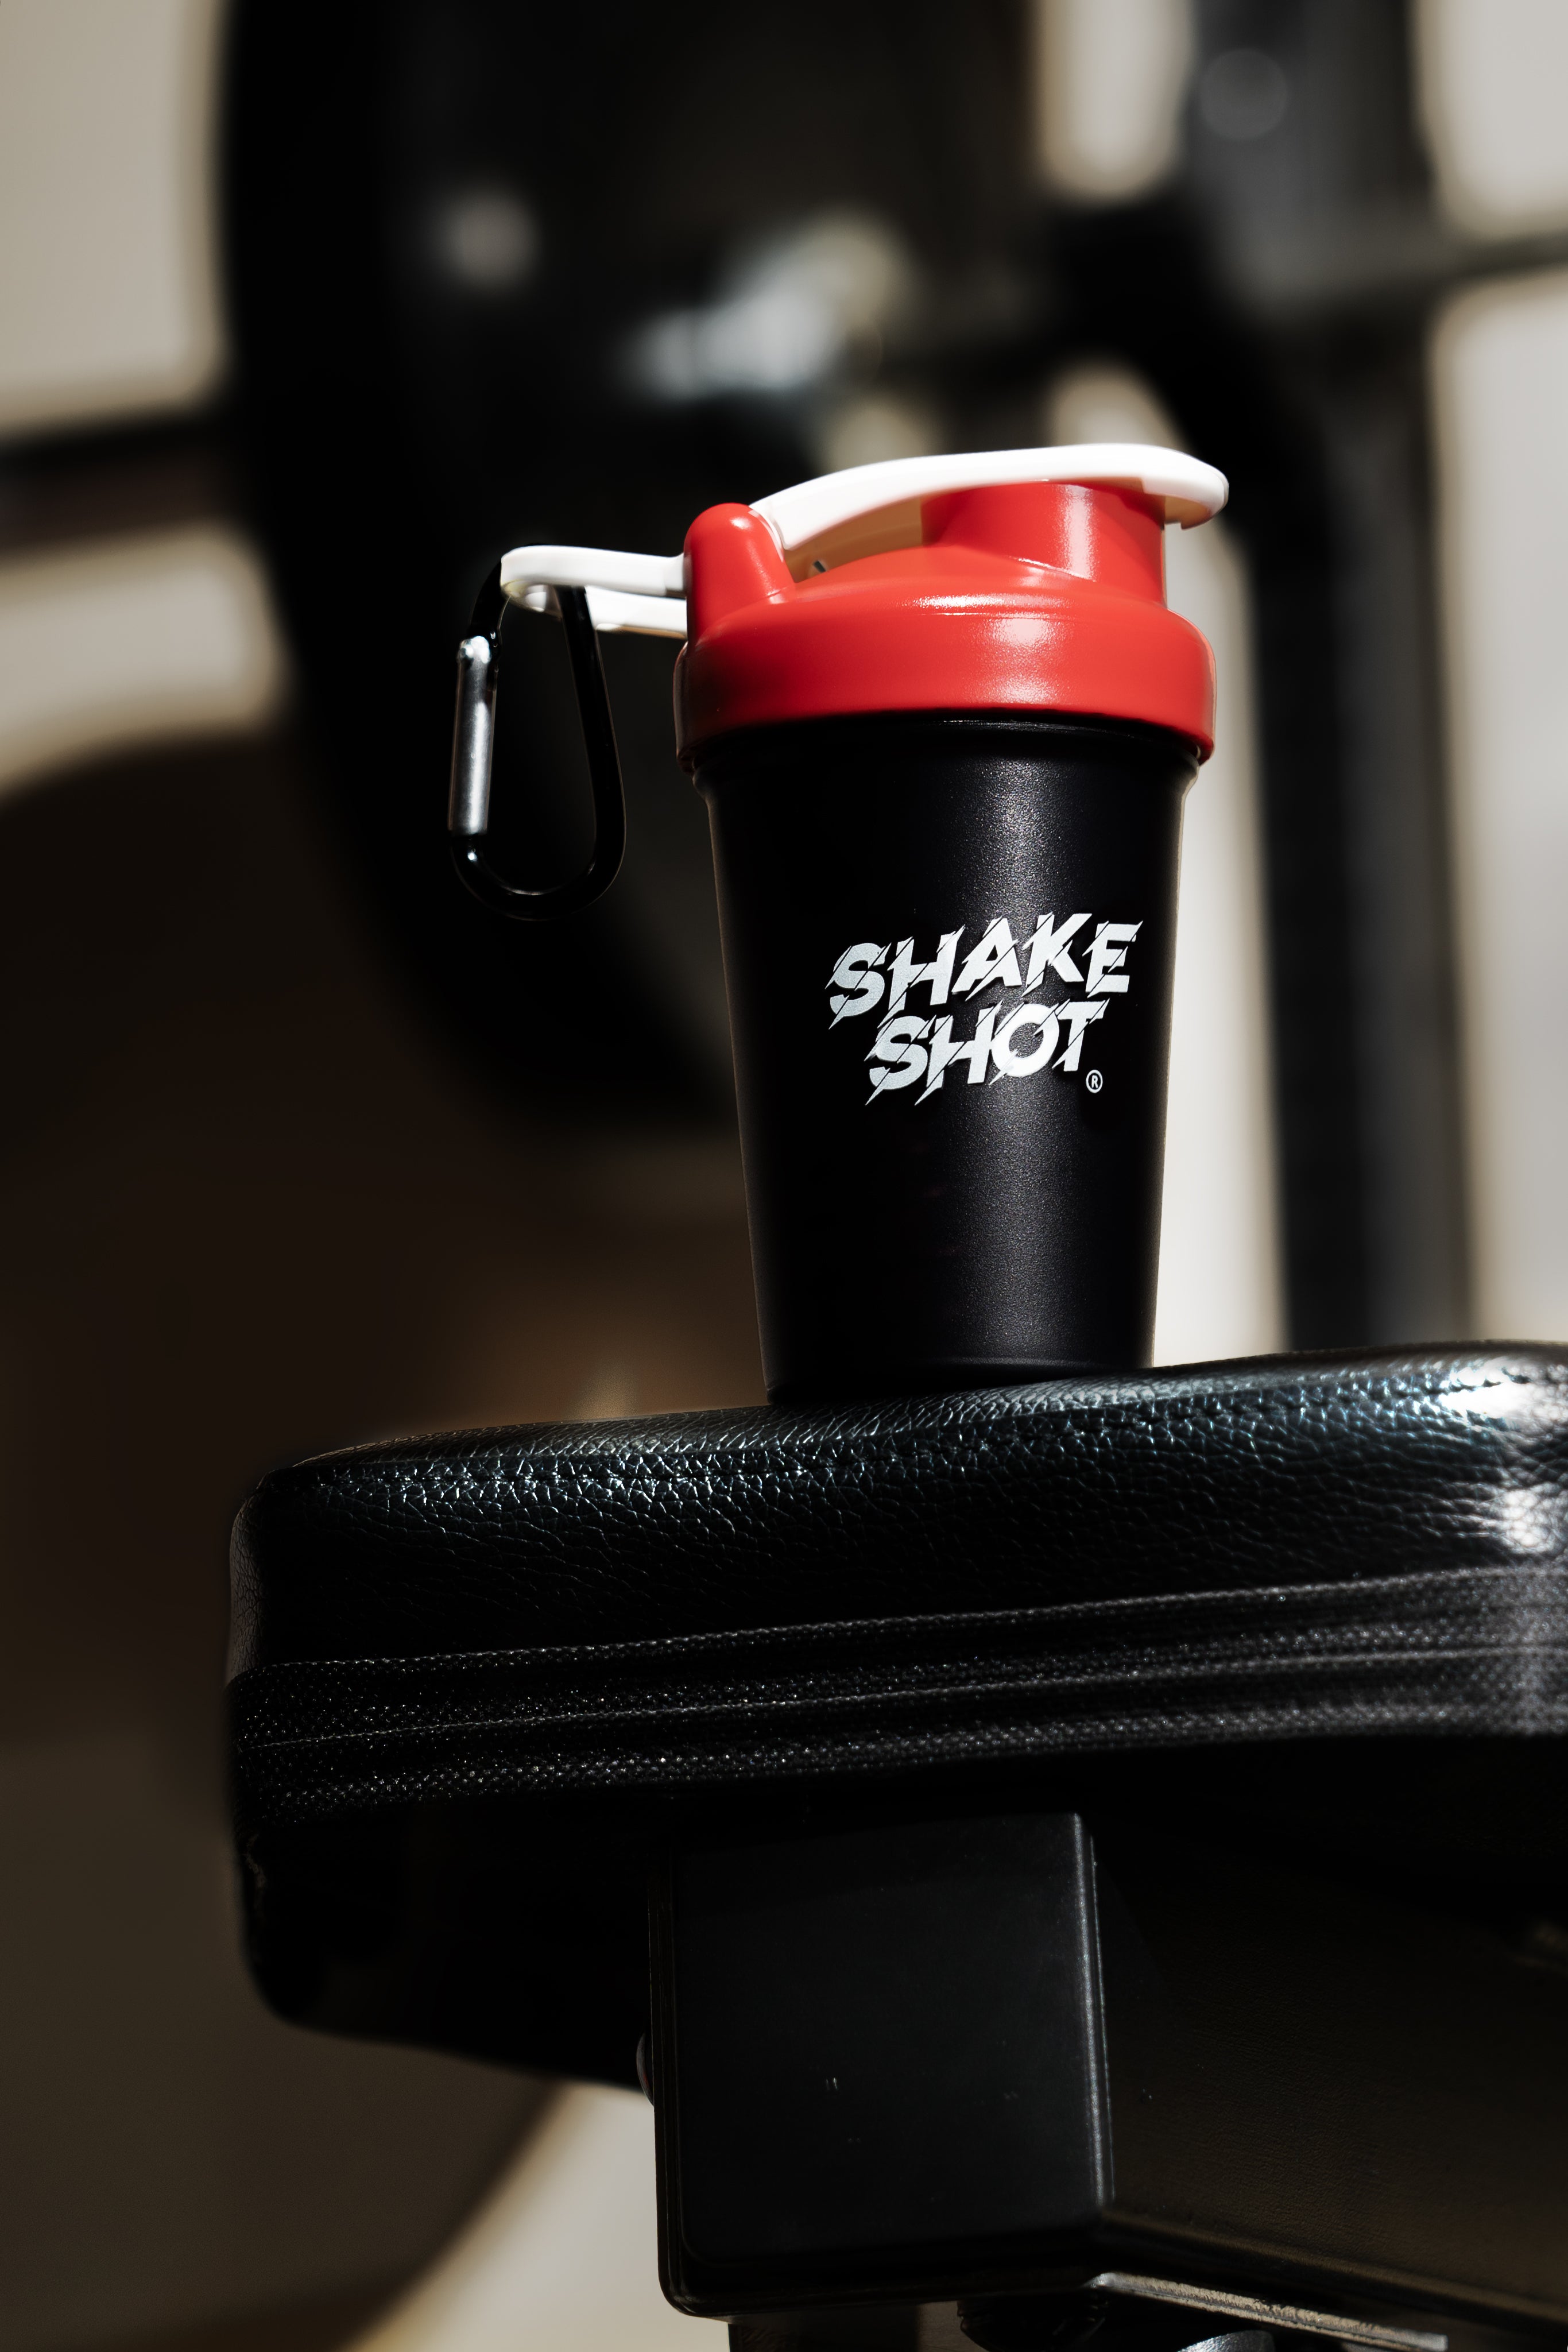 Shake Shot - Black/Red- 4oz Mini Shaker Bottle for Pre Workout, Creatine, &  Small Scoop Supplements …See more Shake Shot - Black/Red- 4oz Mini Shaker